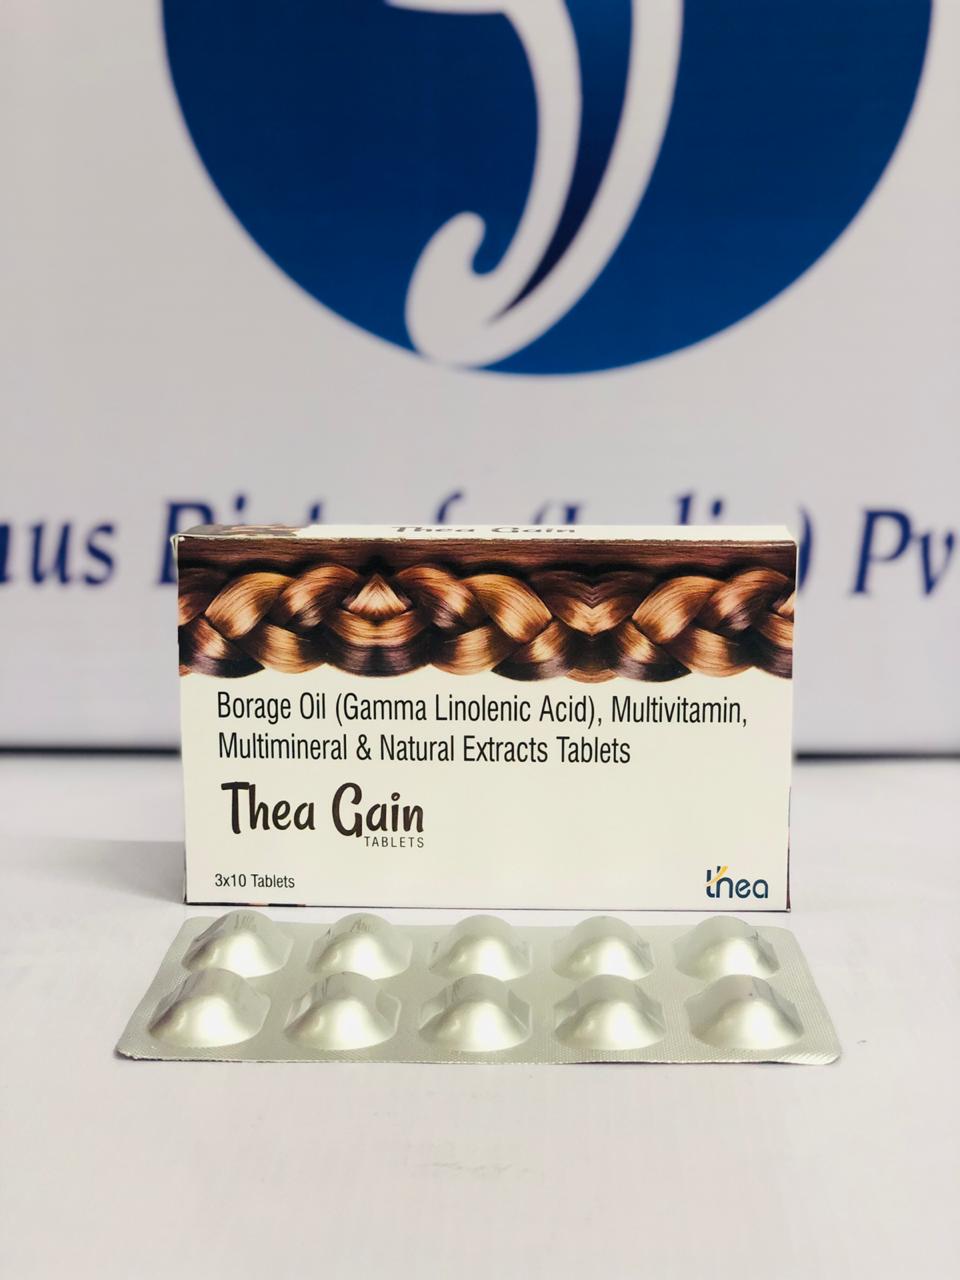 thea gain tablets